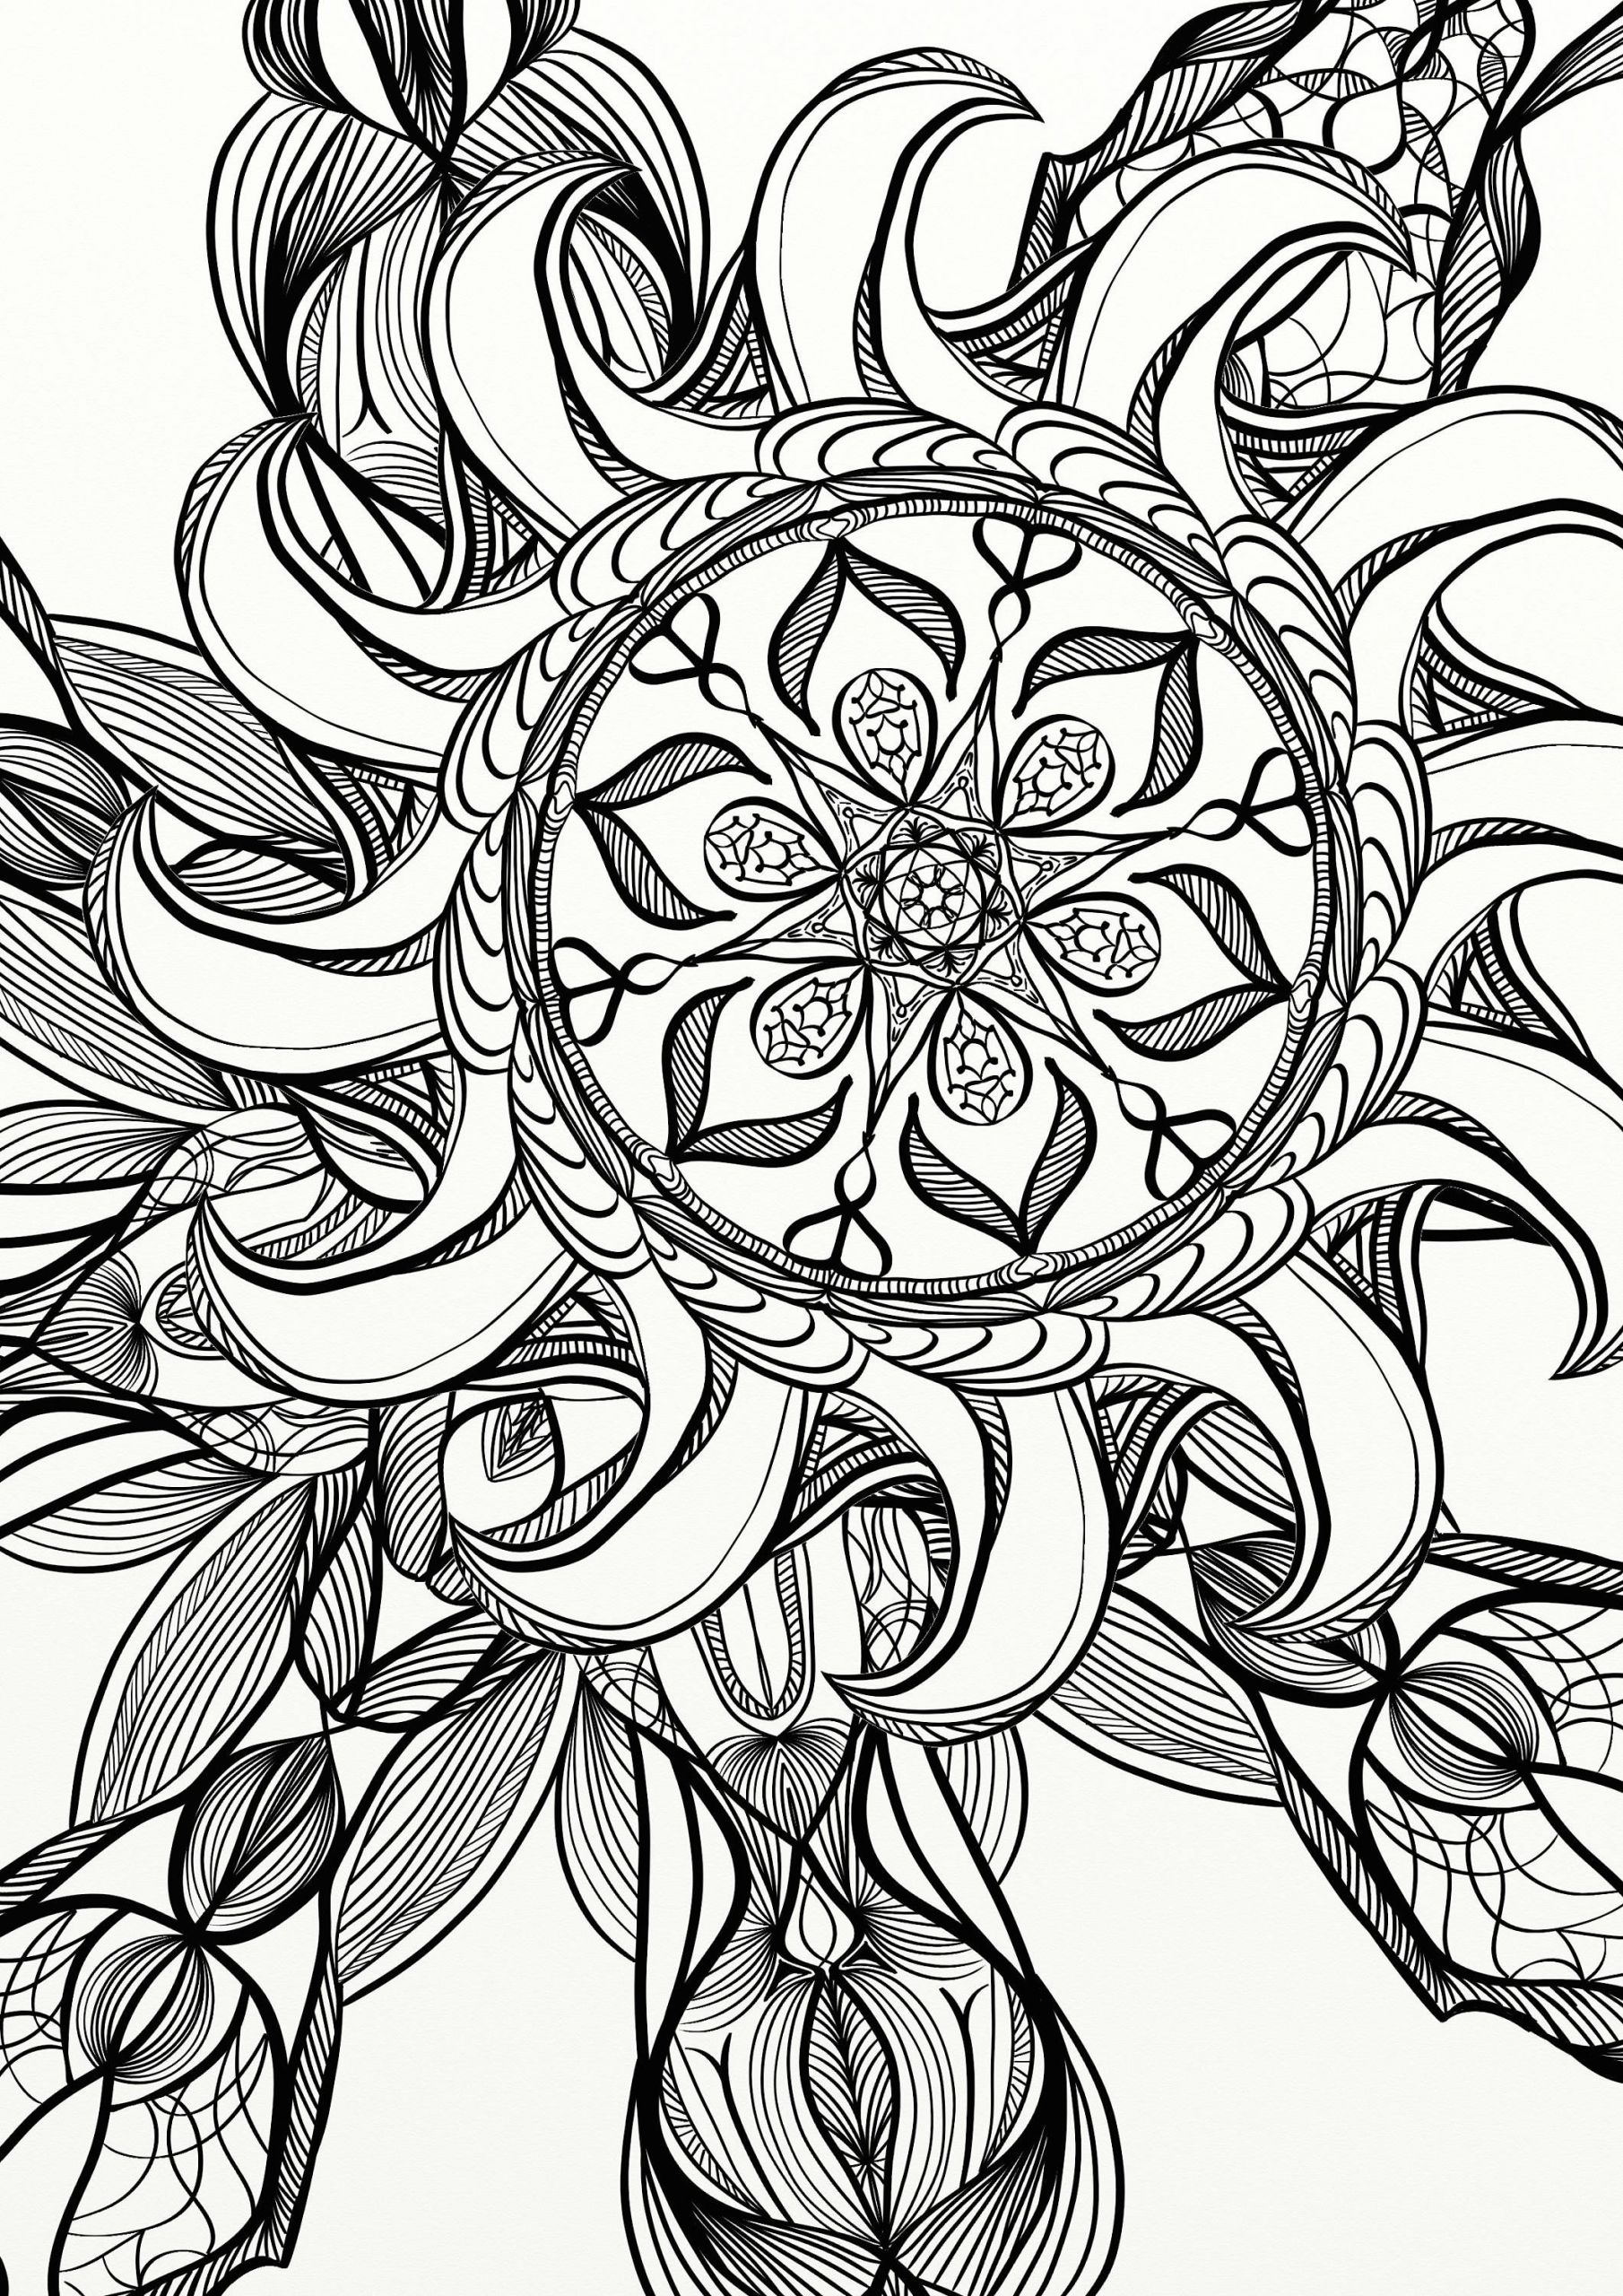 Adult Coloring Book
 Mandala Spiral Relaxing Adult Coloring Page